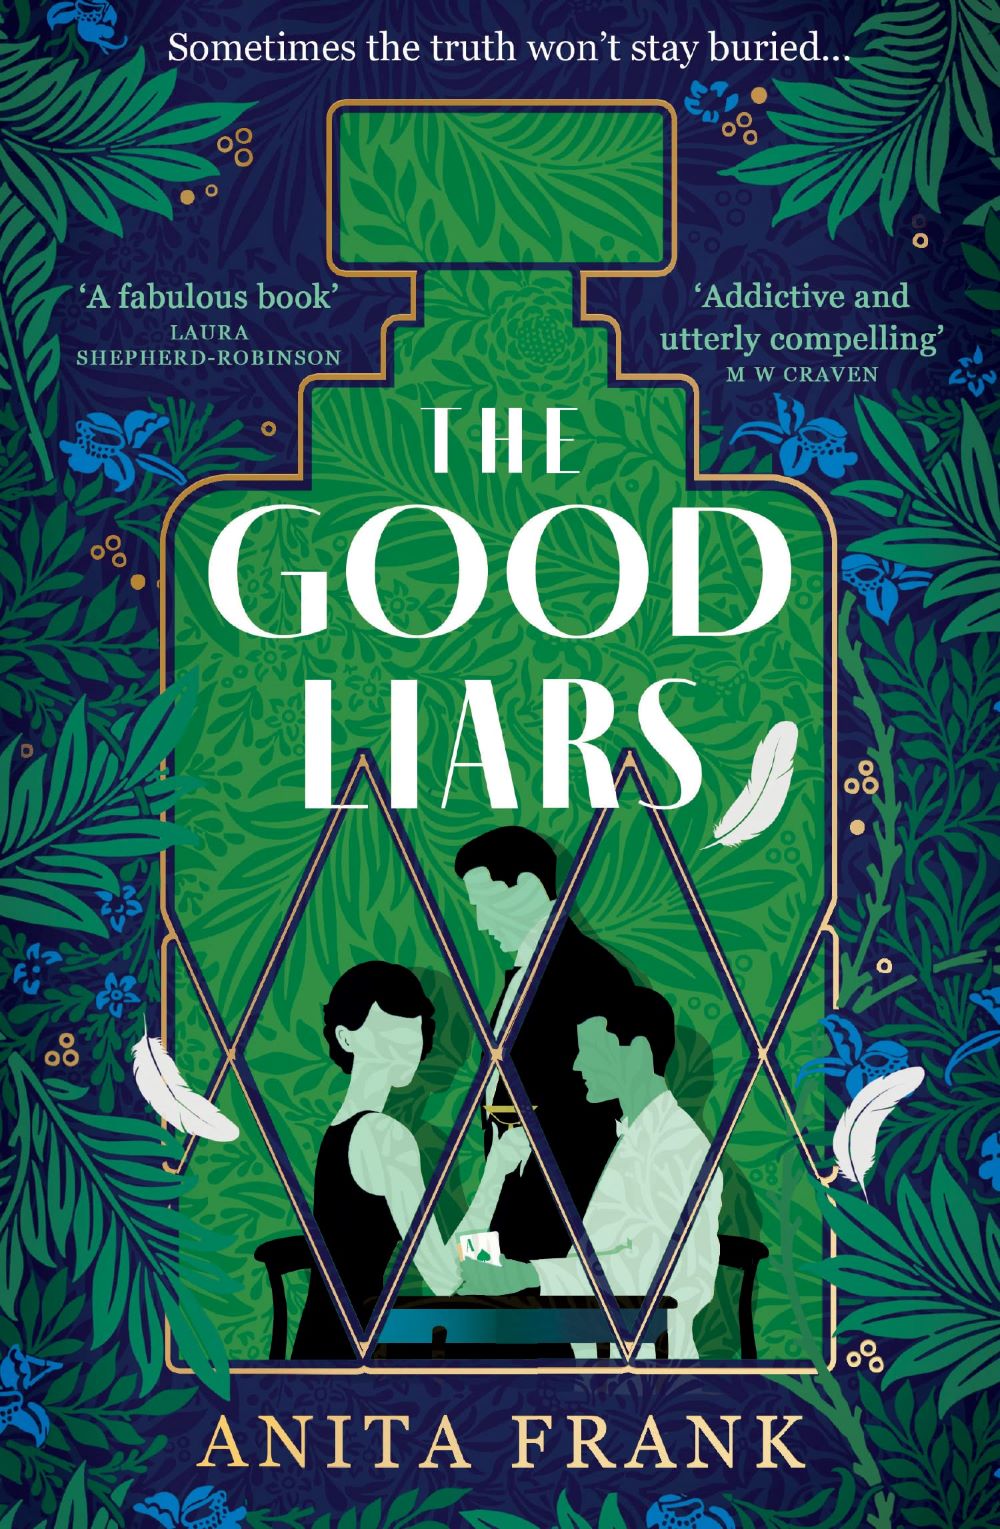 The_good_liars_book_cover